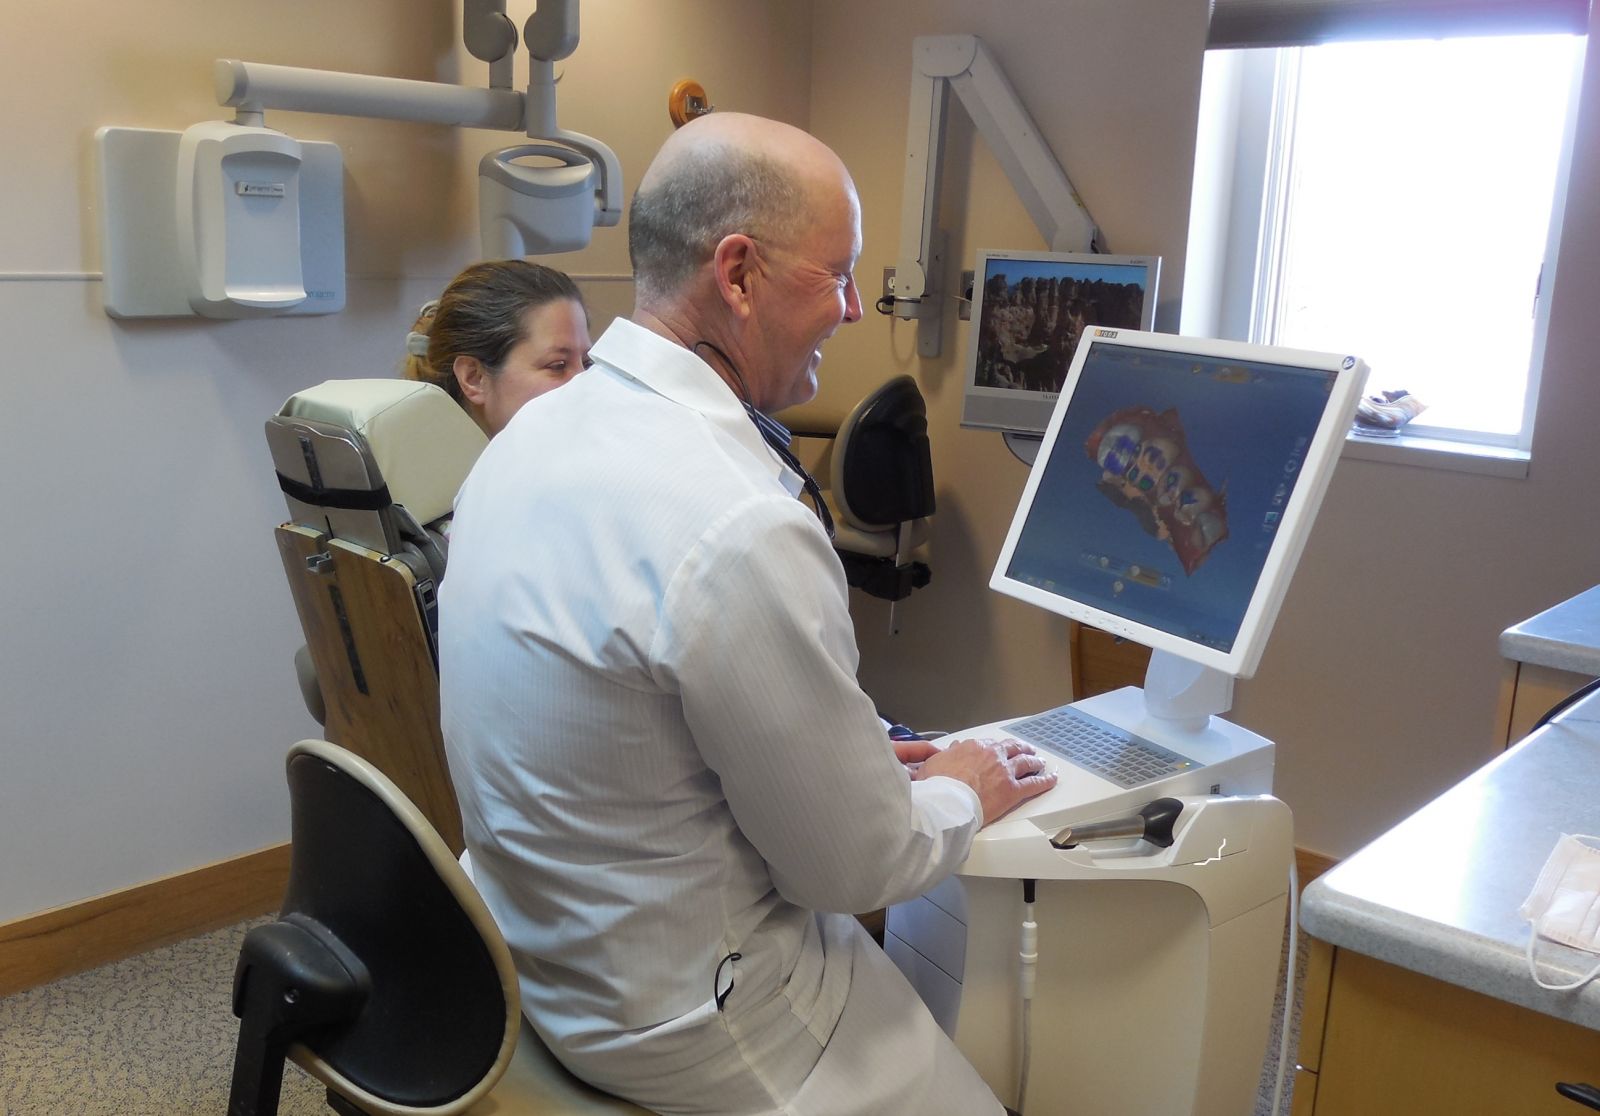 Photograph of dentist and patient during Same Day Crowns appointment, Ann Arbor, MI